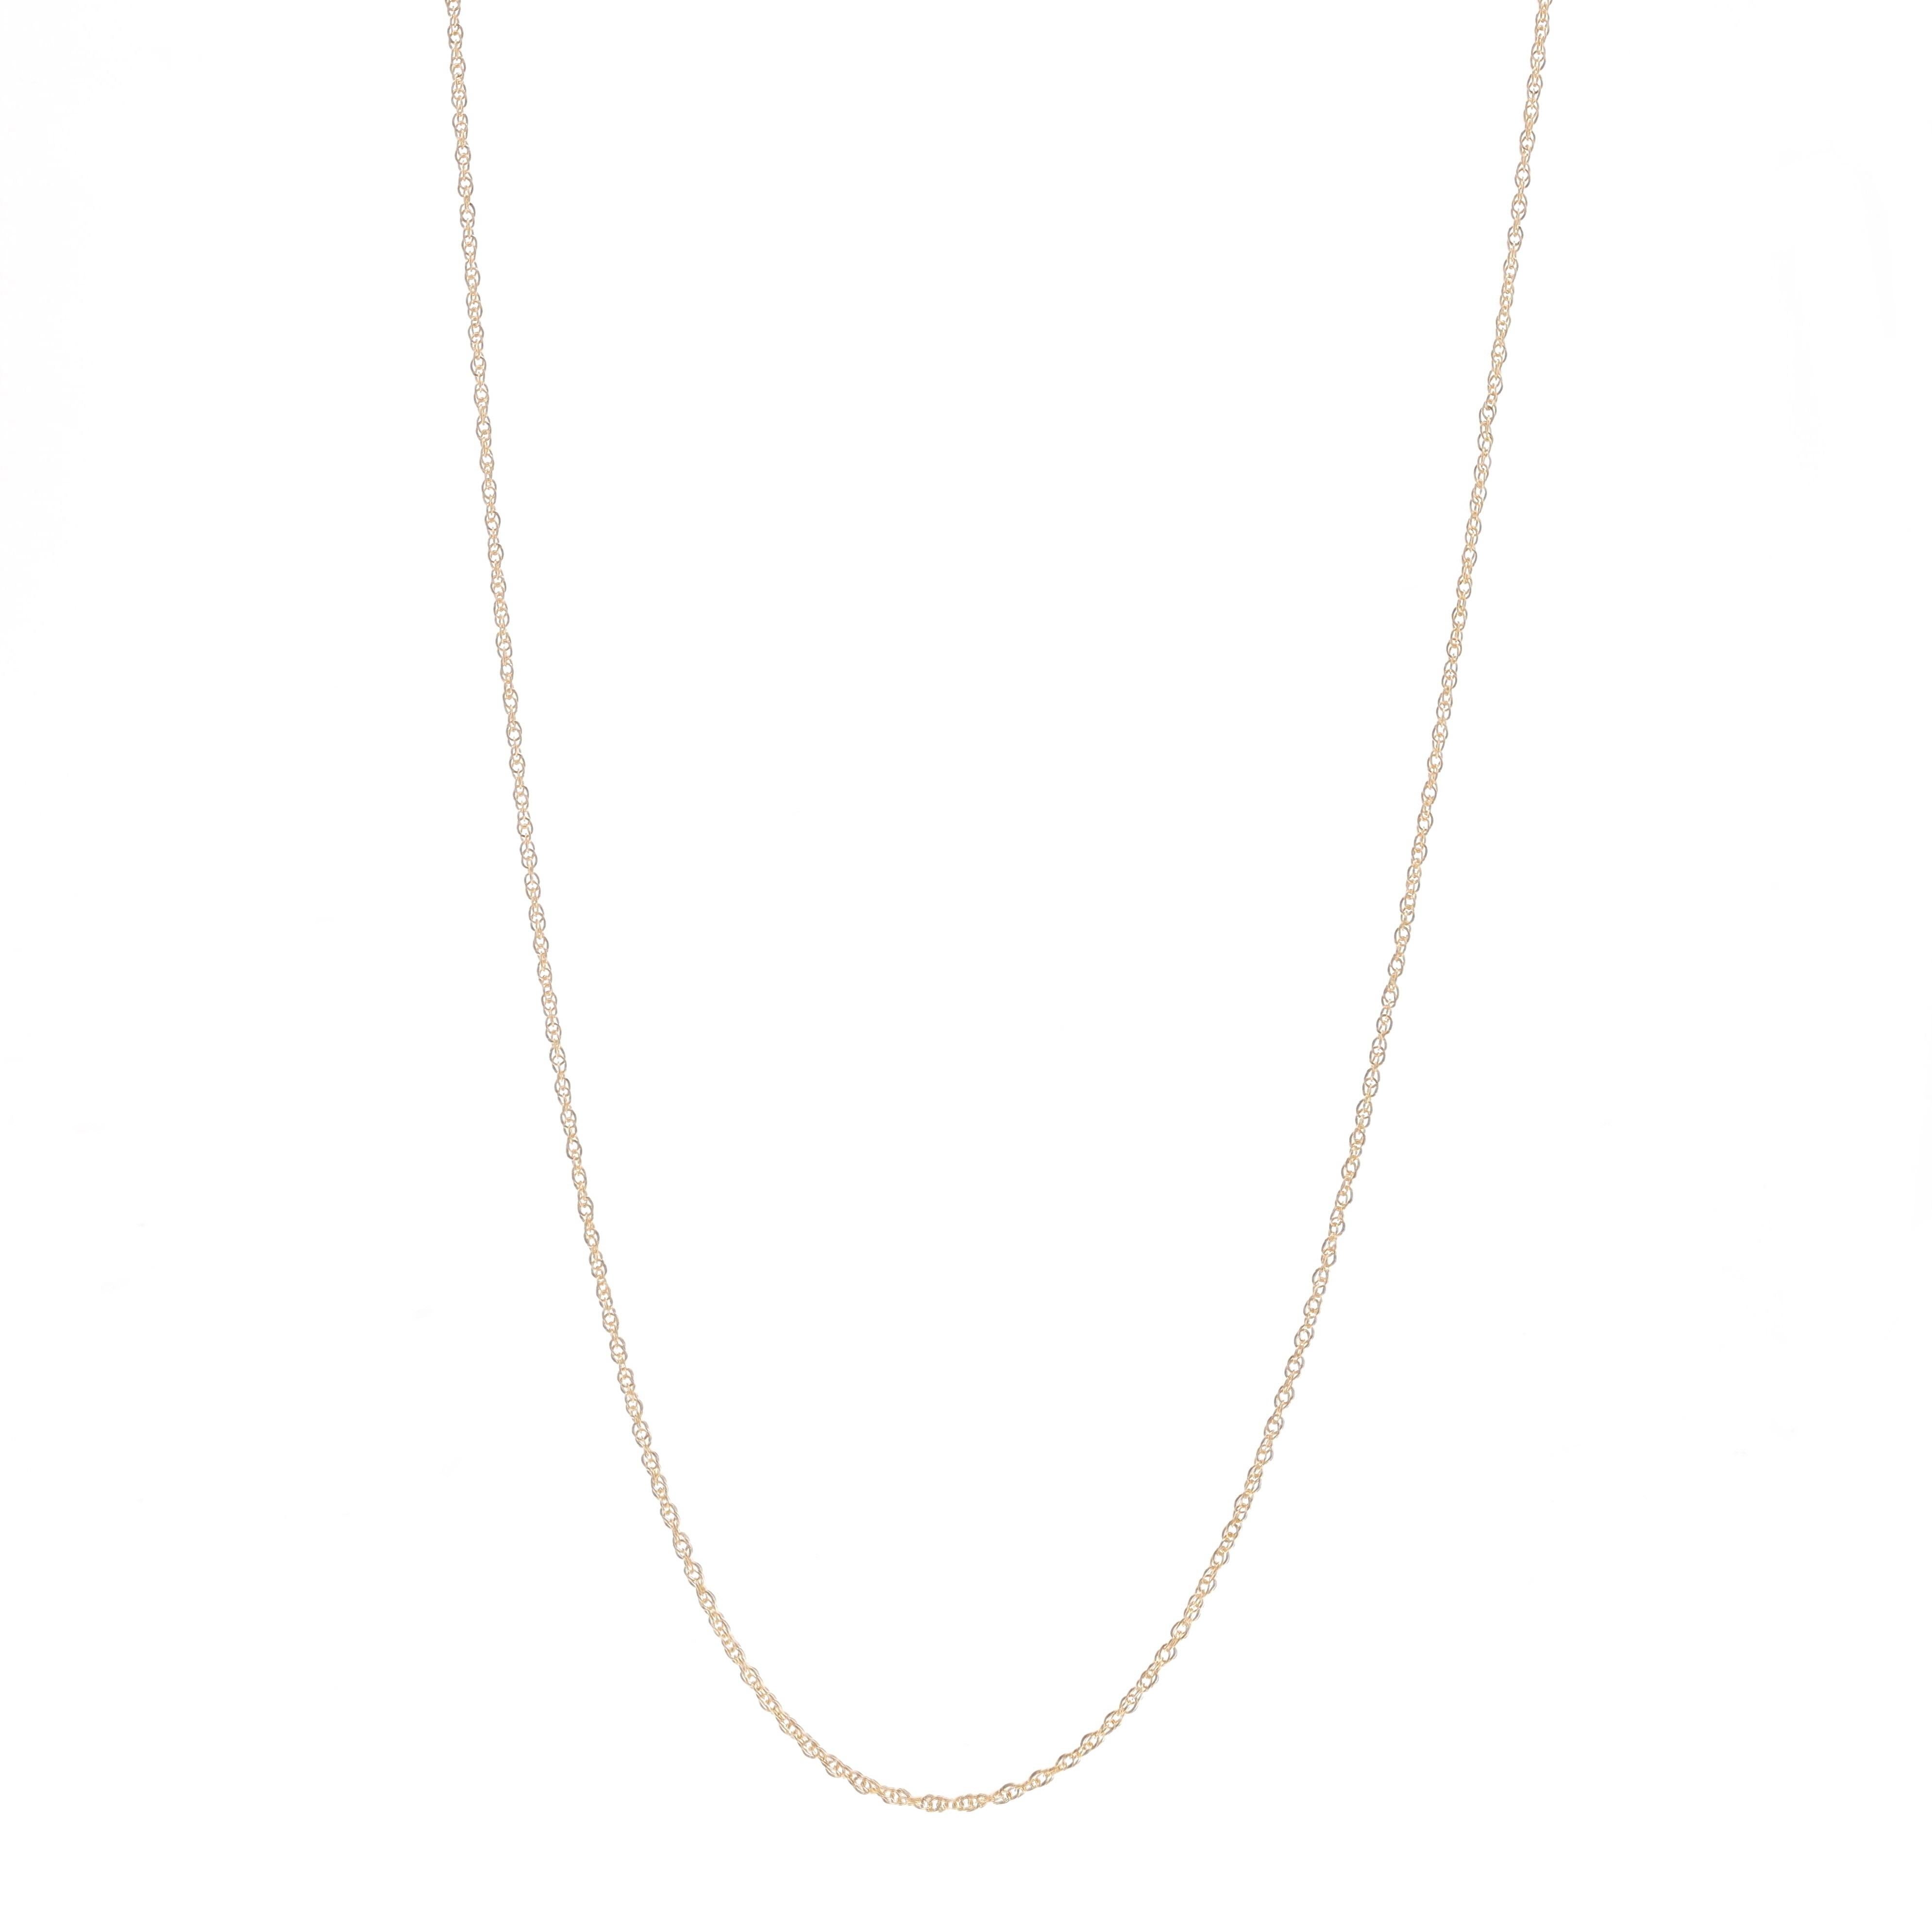 Metal Content: 14k Yellow Gold

Chain Style: Prince of Wales
Necklace Style: Chain
Fastening Type: Spring Ring Clasp

Measurements

Length: 23 3/4